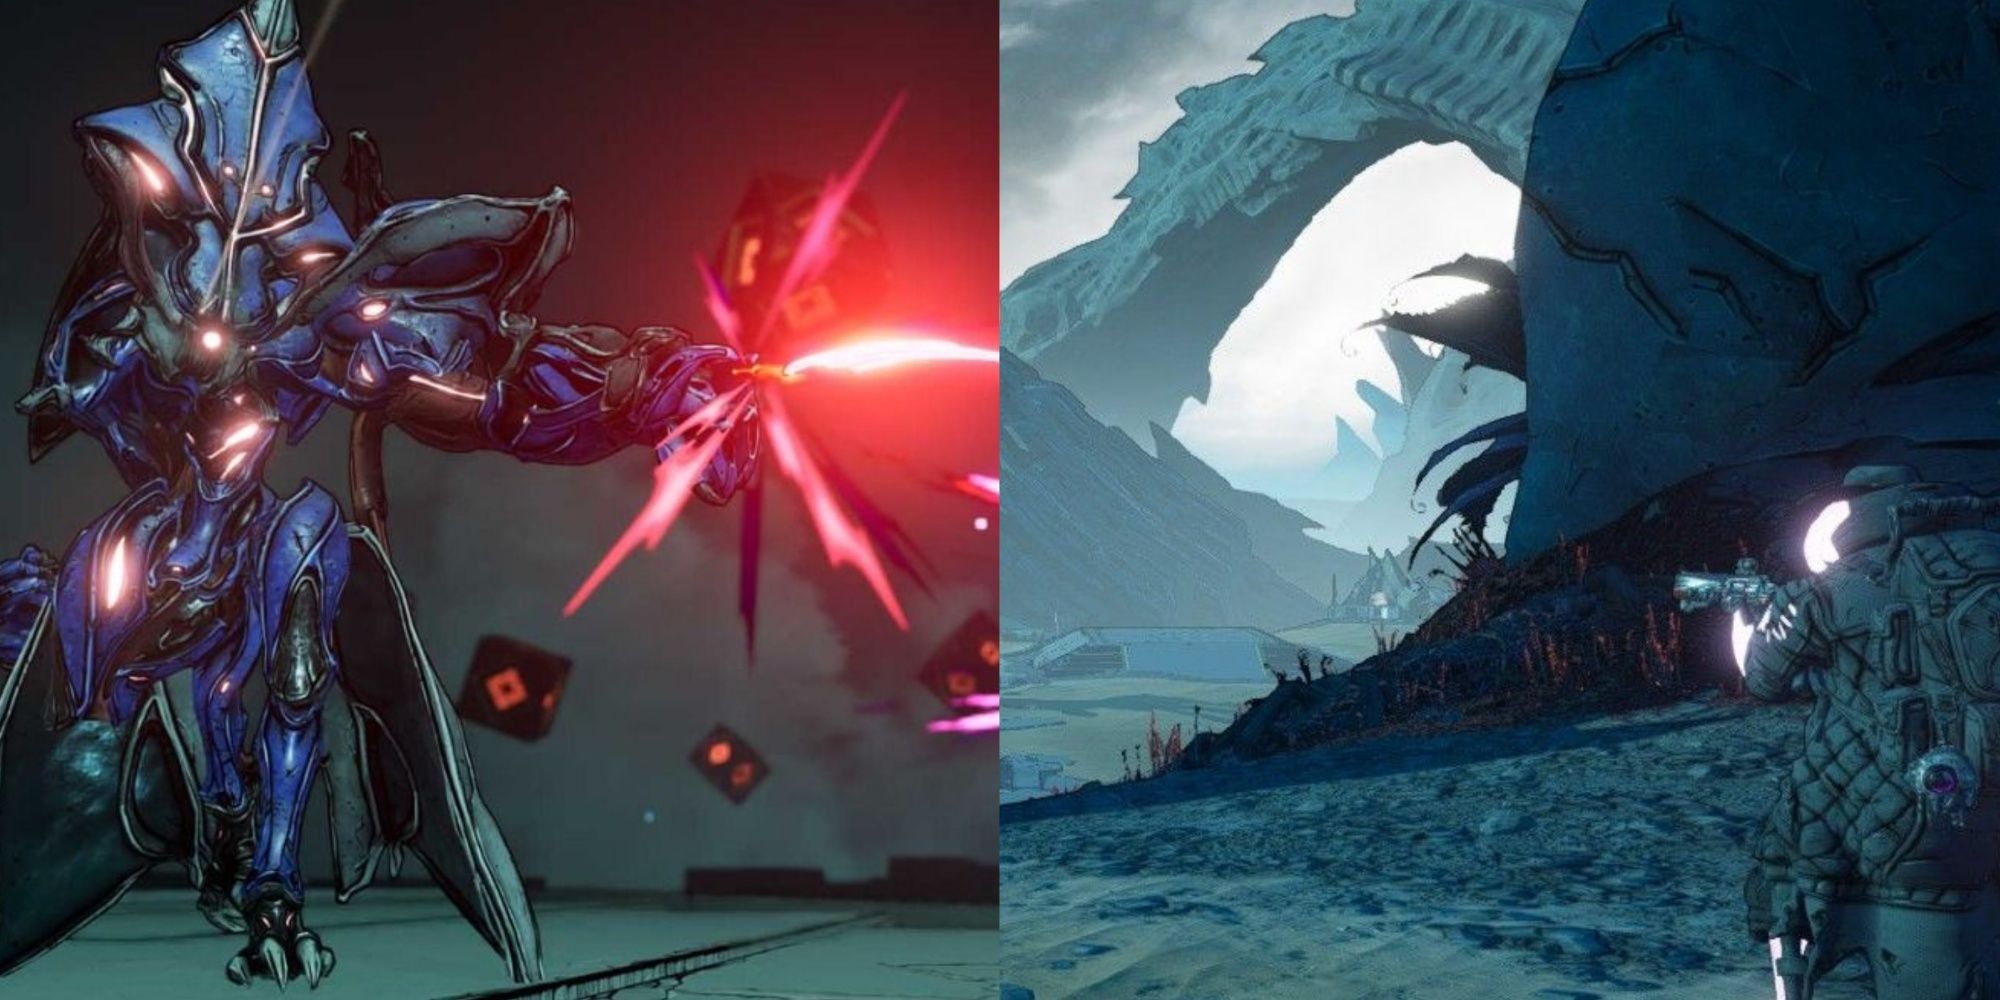 Split image of the Seer and the player aiming in Borderlands 3.